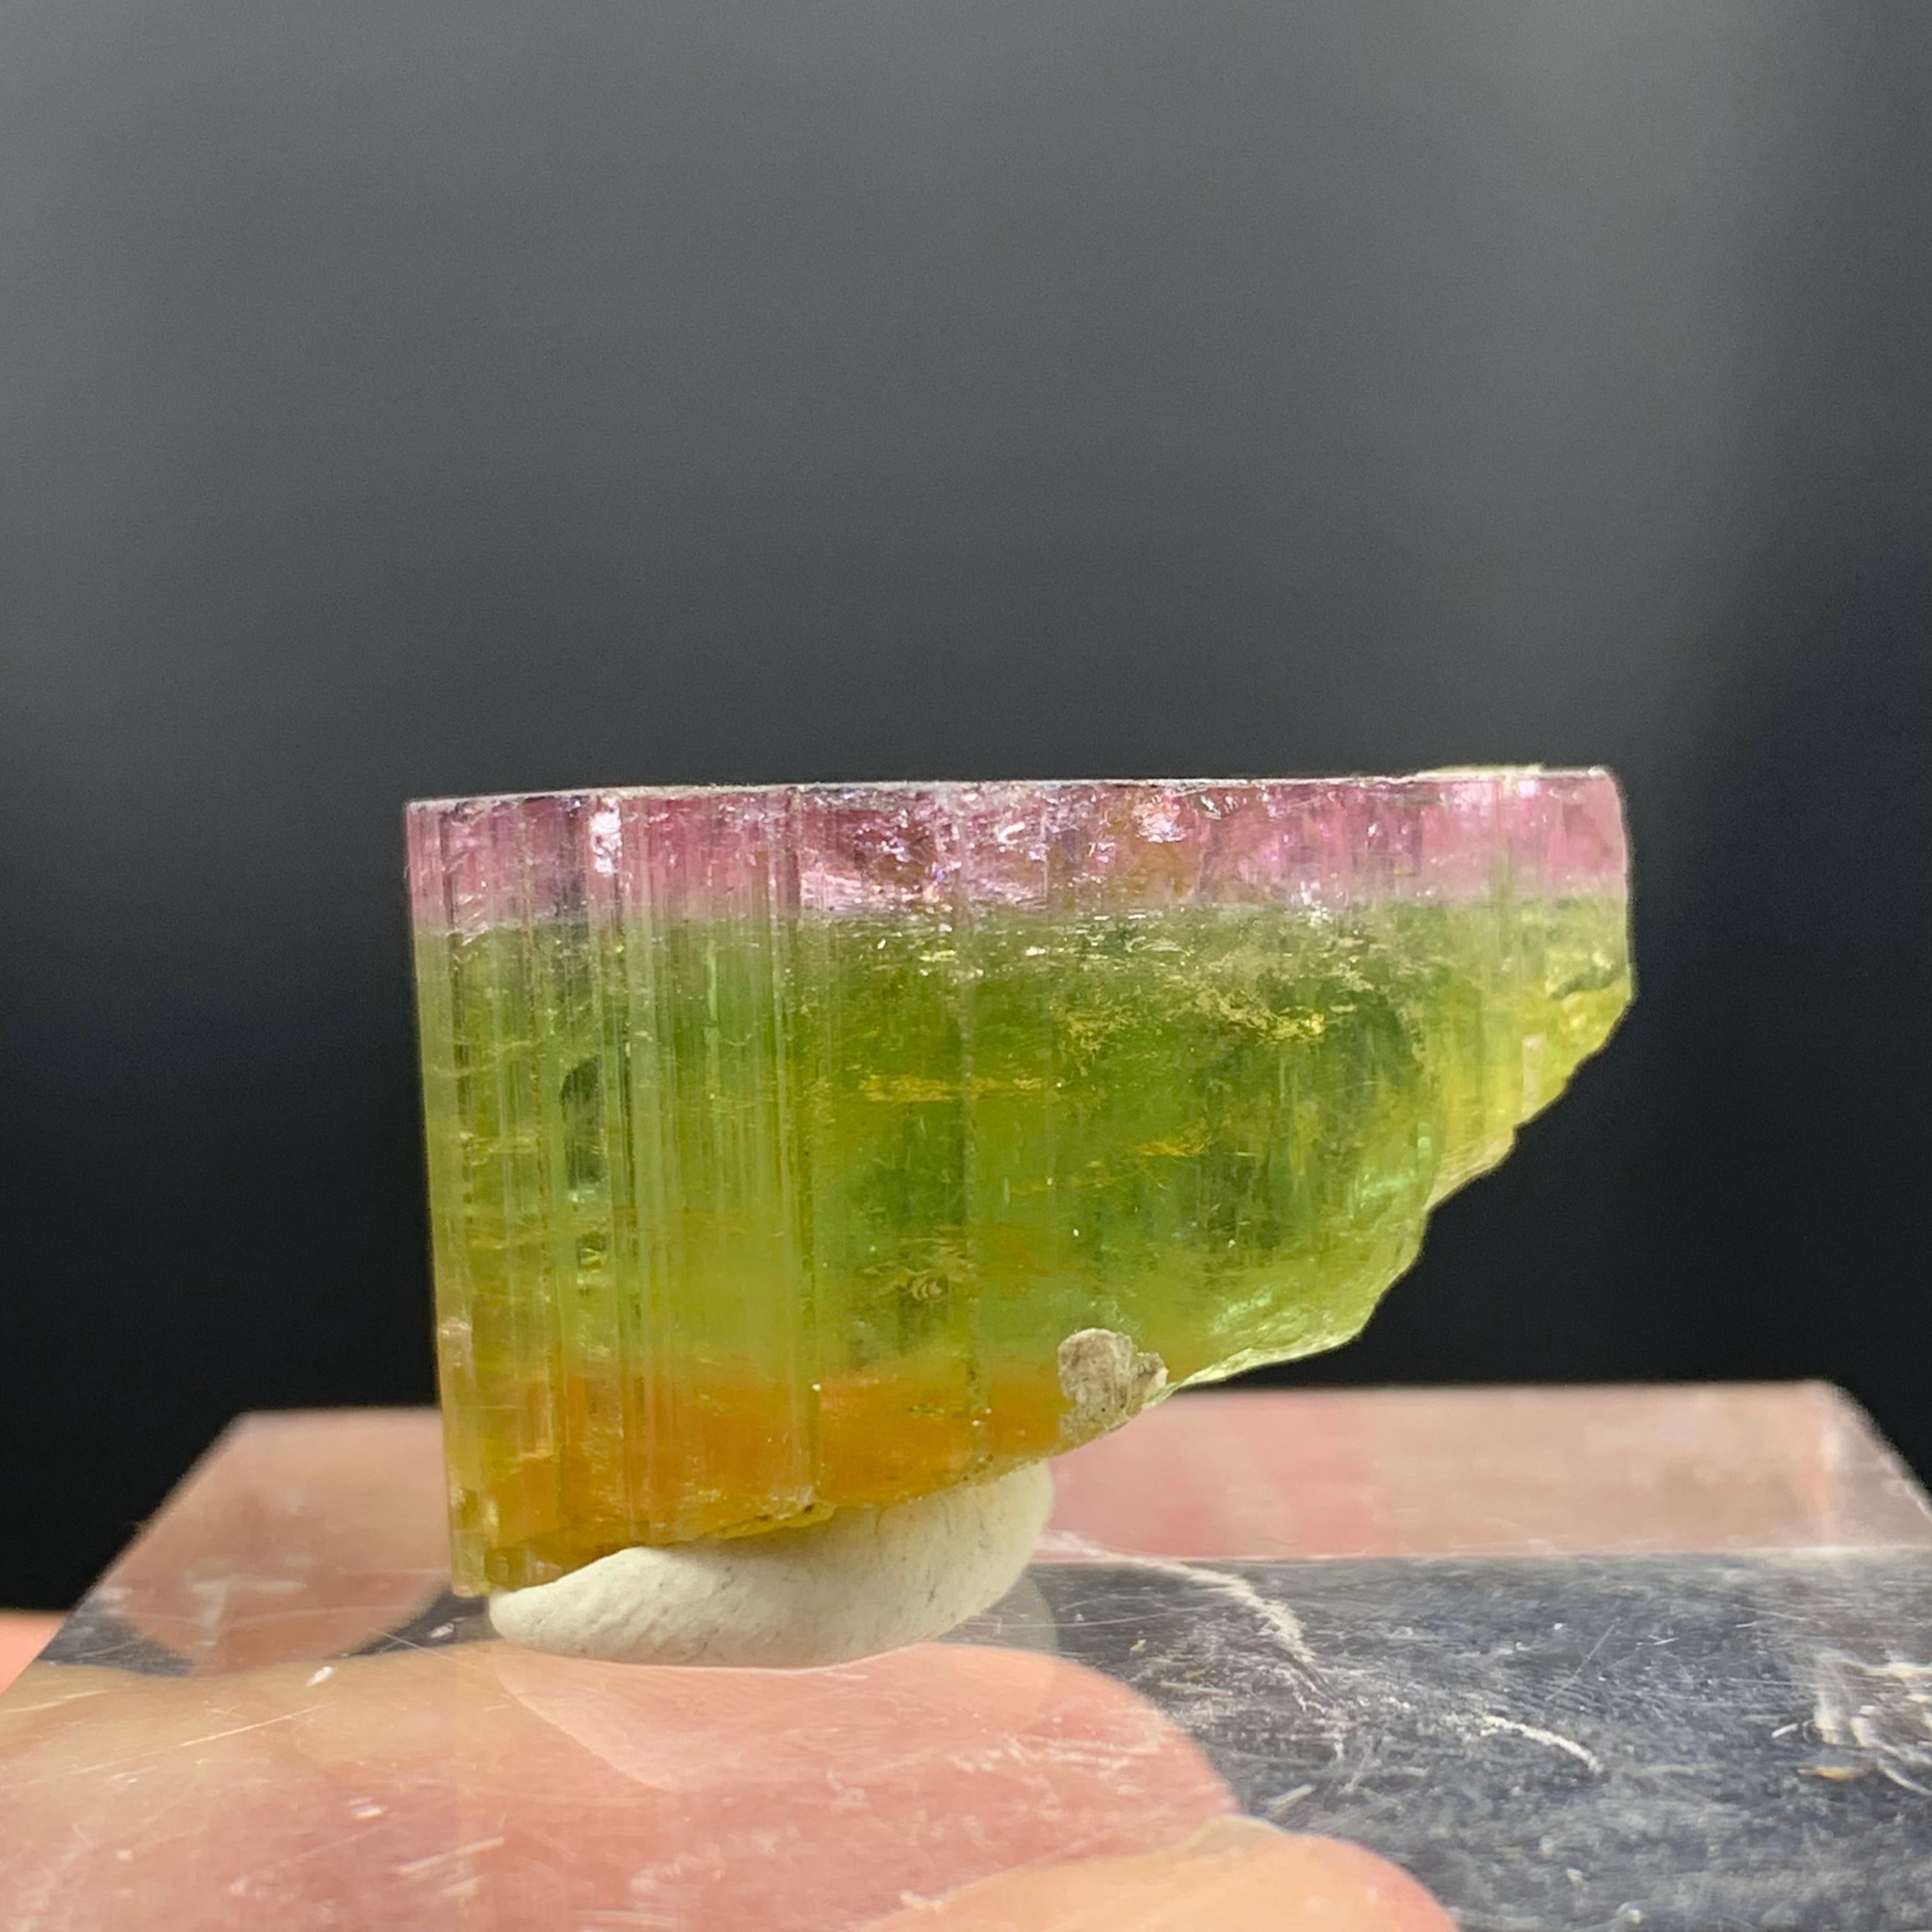 Elegant Tri Color Tourmaline Crystal From Paprook, Afghanistan 
Weight : 46.90 Carat 
Dim: 1.6 x 2.5 x 1.6 Cm 
Color : Pink, Green and Orange 
Origin : Paprook Mine, Afghanistan 

Tourmaline is a crystalline silicate mineral group in which boron is